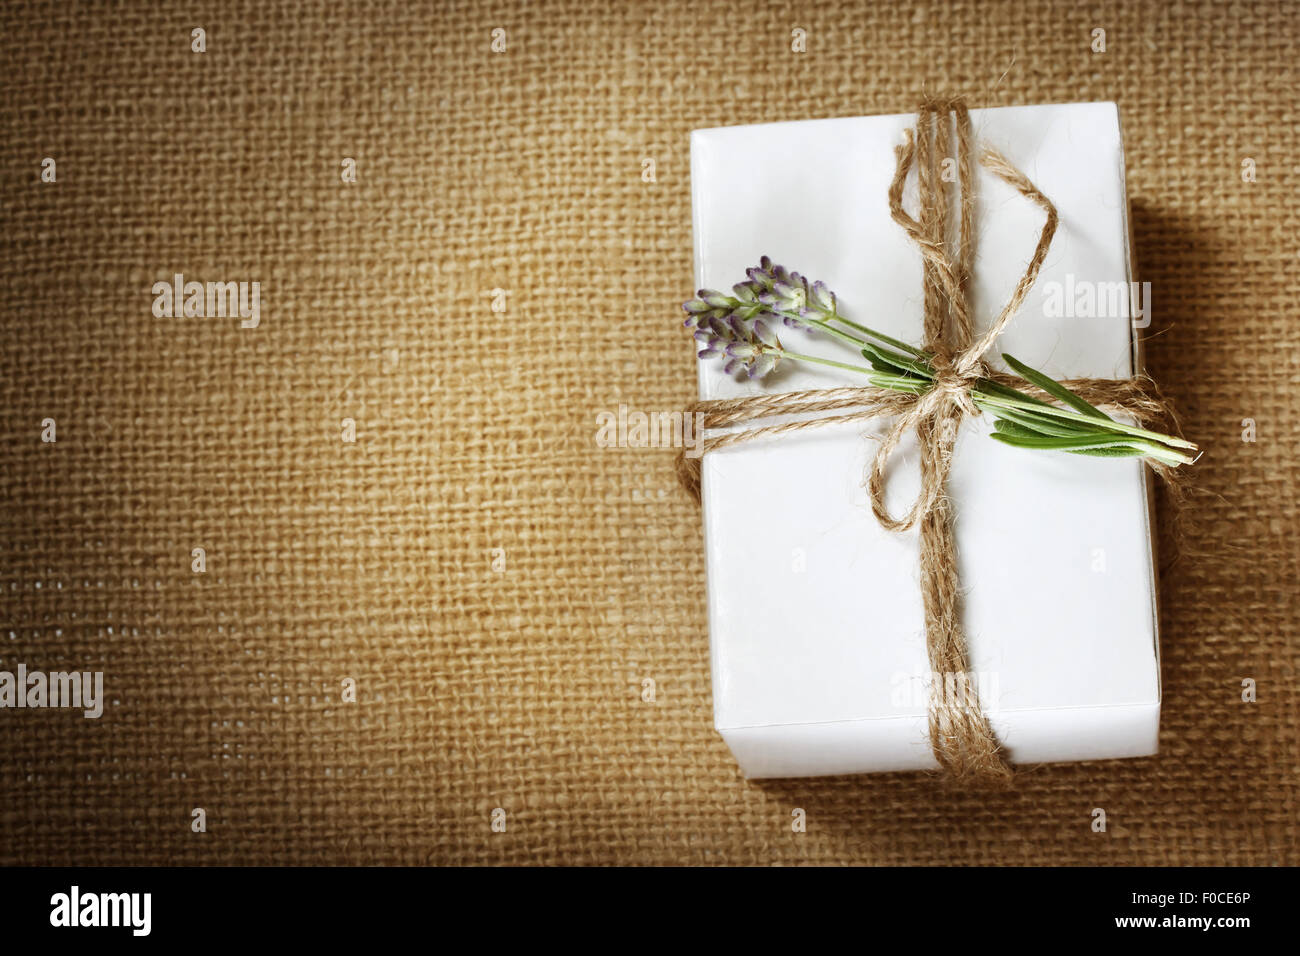 Homemade giftbox with lavender sprig on burlap cloth Stock Photo